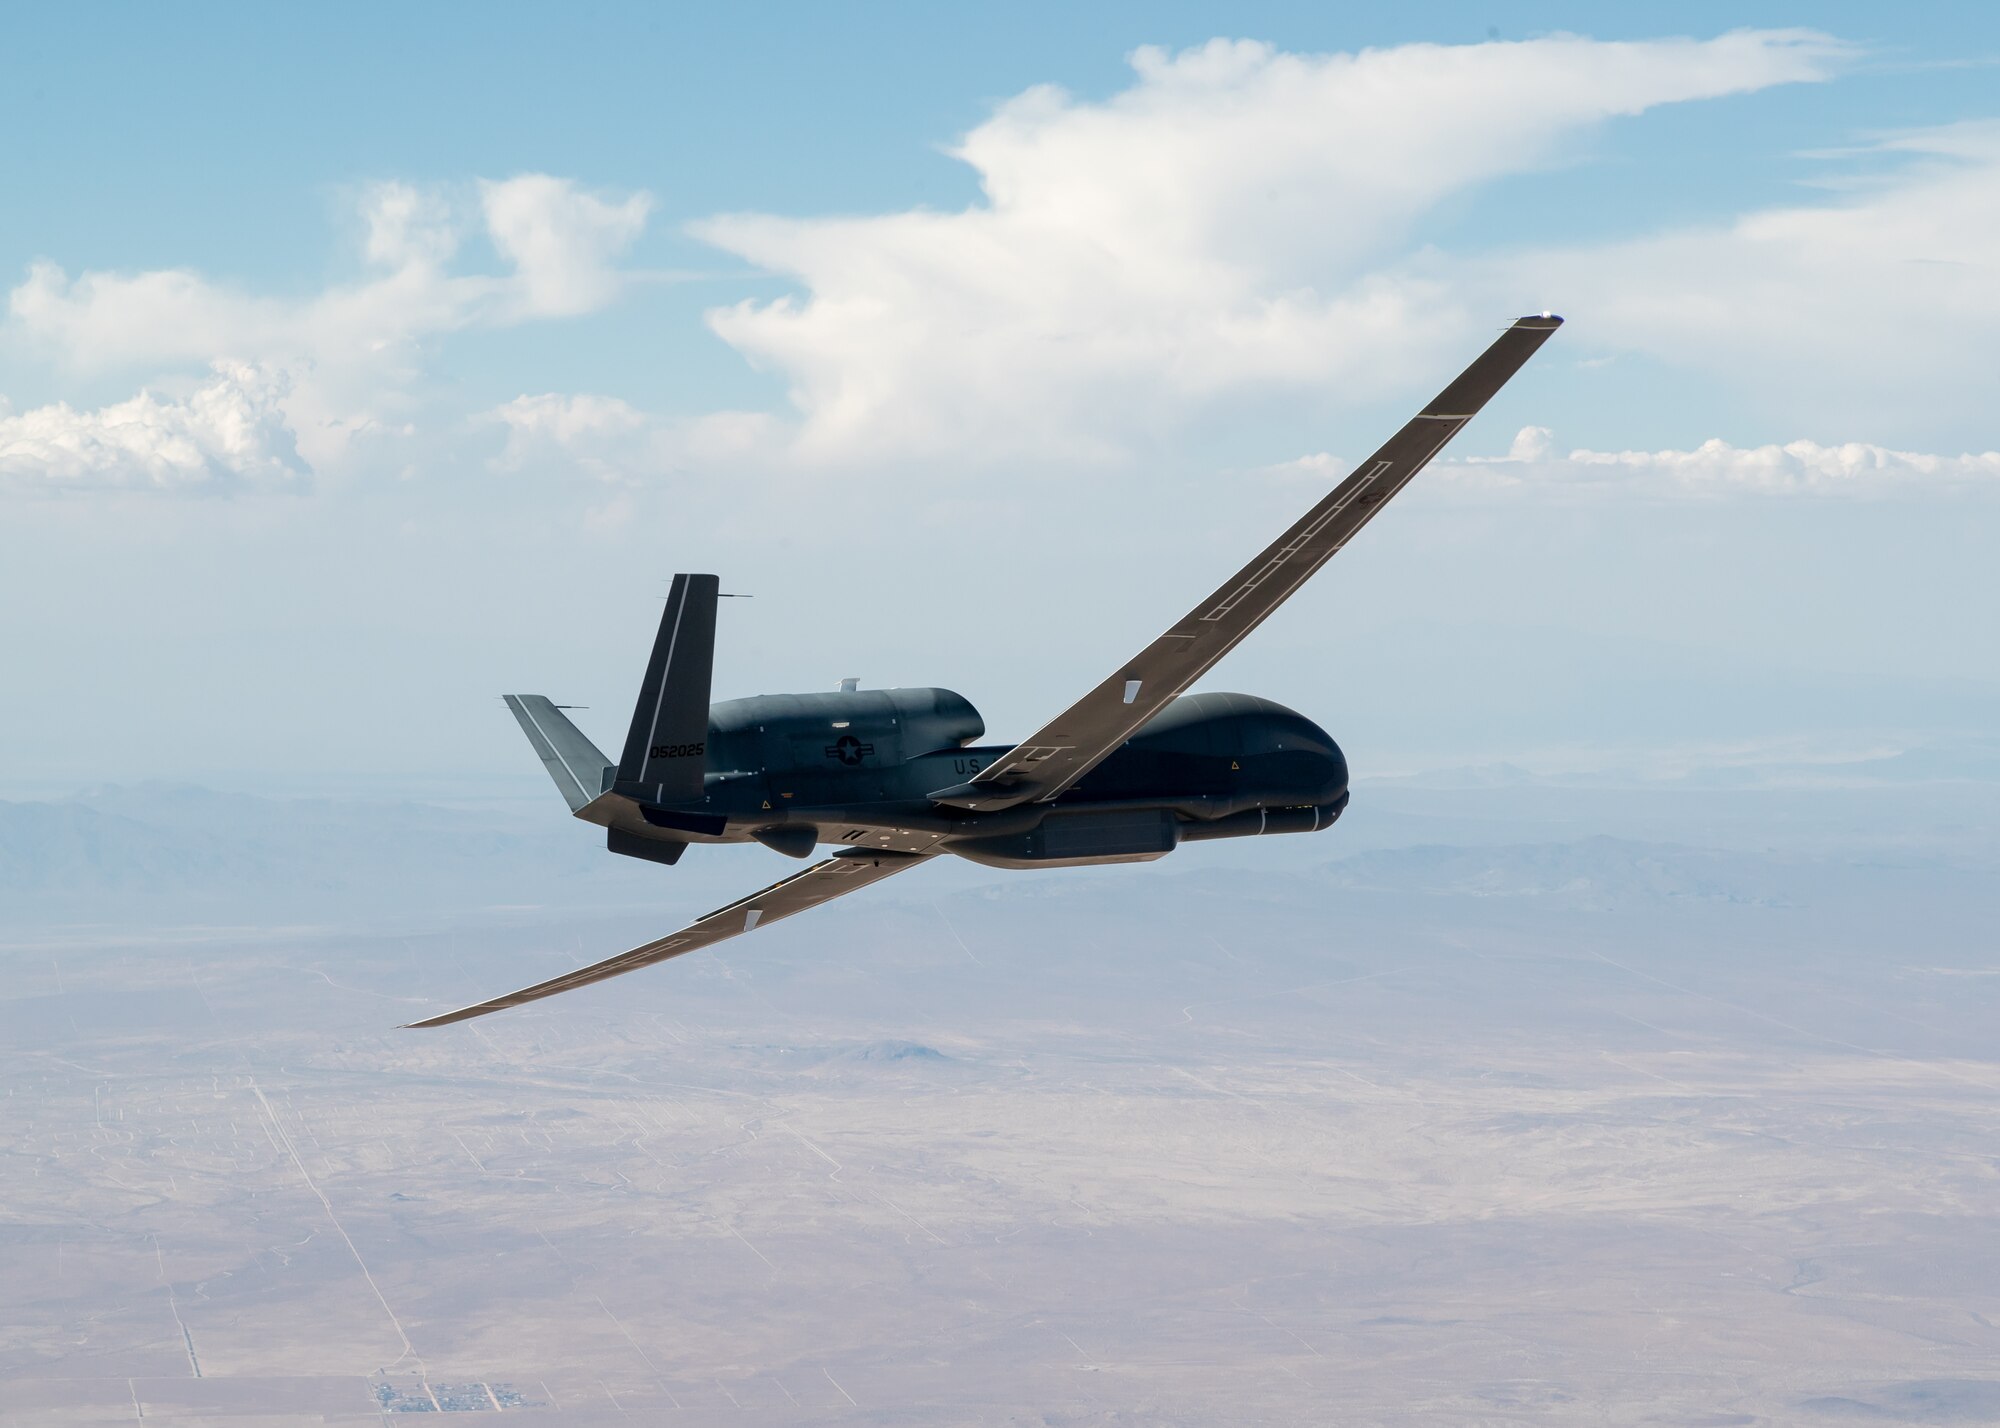 An RQ-4 Global Hawk assigned to the 452nd Flight Test Squadron flies in the skies above Edwards Air Force Base, California, May 23.The 452nd FLTS held a “sunsetting” event for the RQ-4 Global Hawk flight test program at Edwards AFB, June 9. The event marked the completion of the squadron’s test campaign for the aircraft. (Air Force photo by Bryce Bennett)